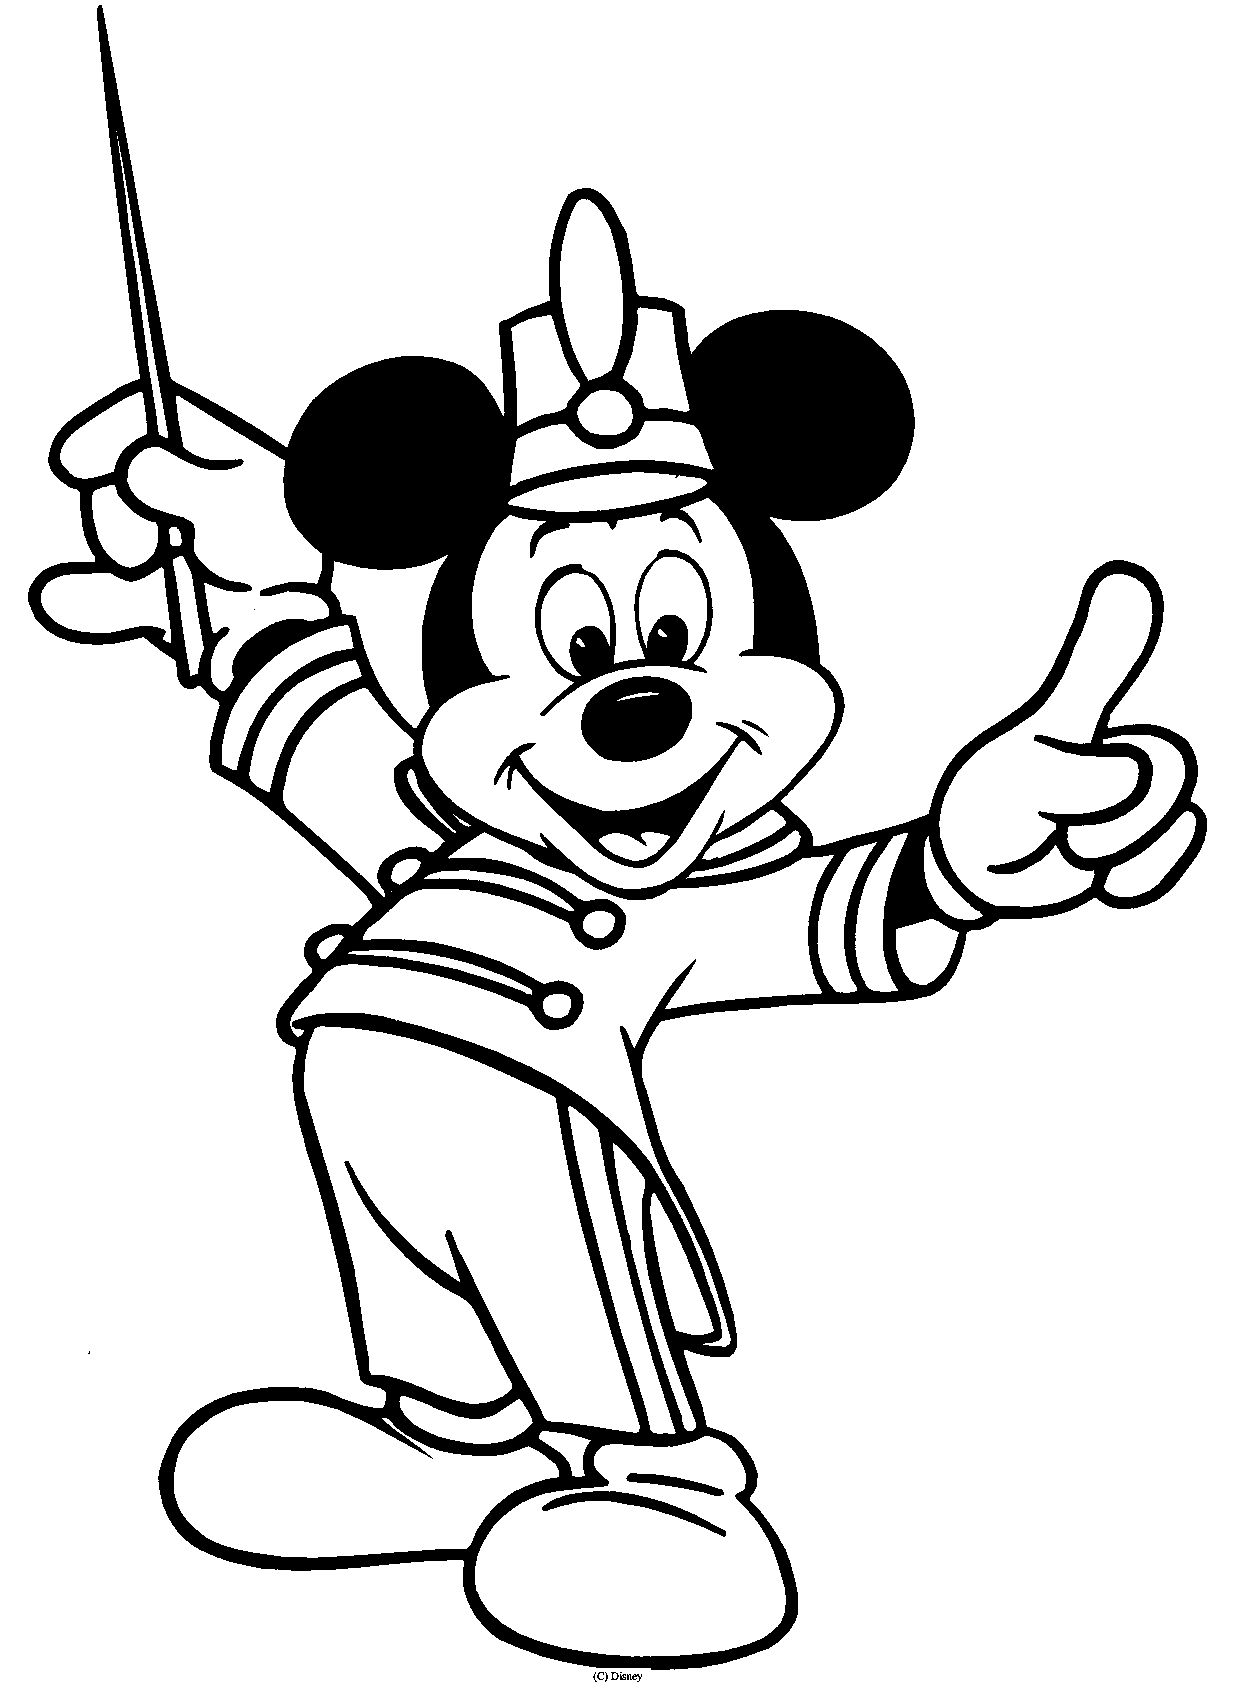 Mickey mouse clipart free large images 3